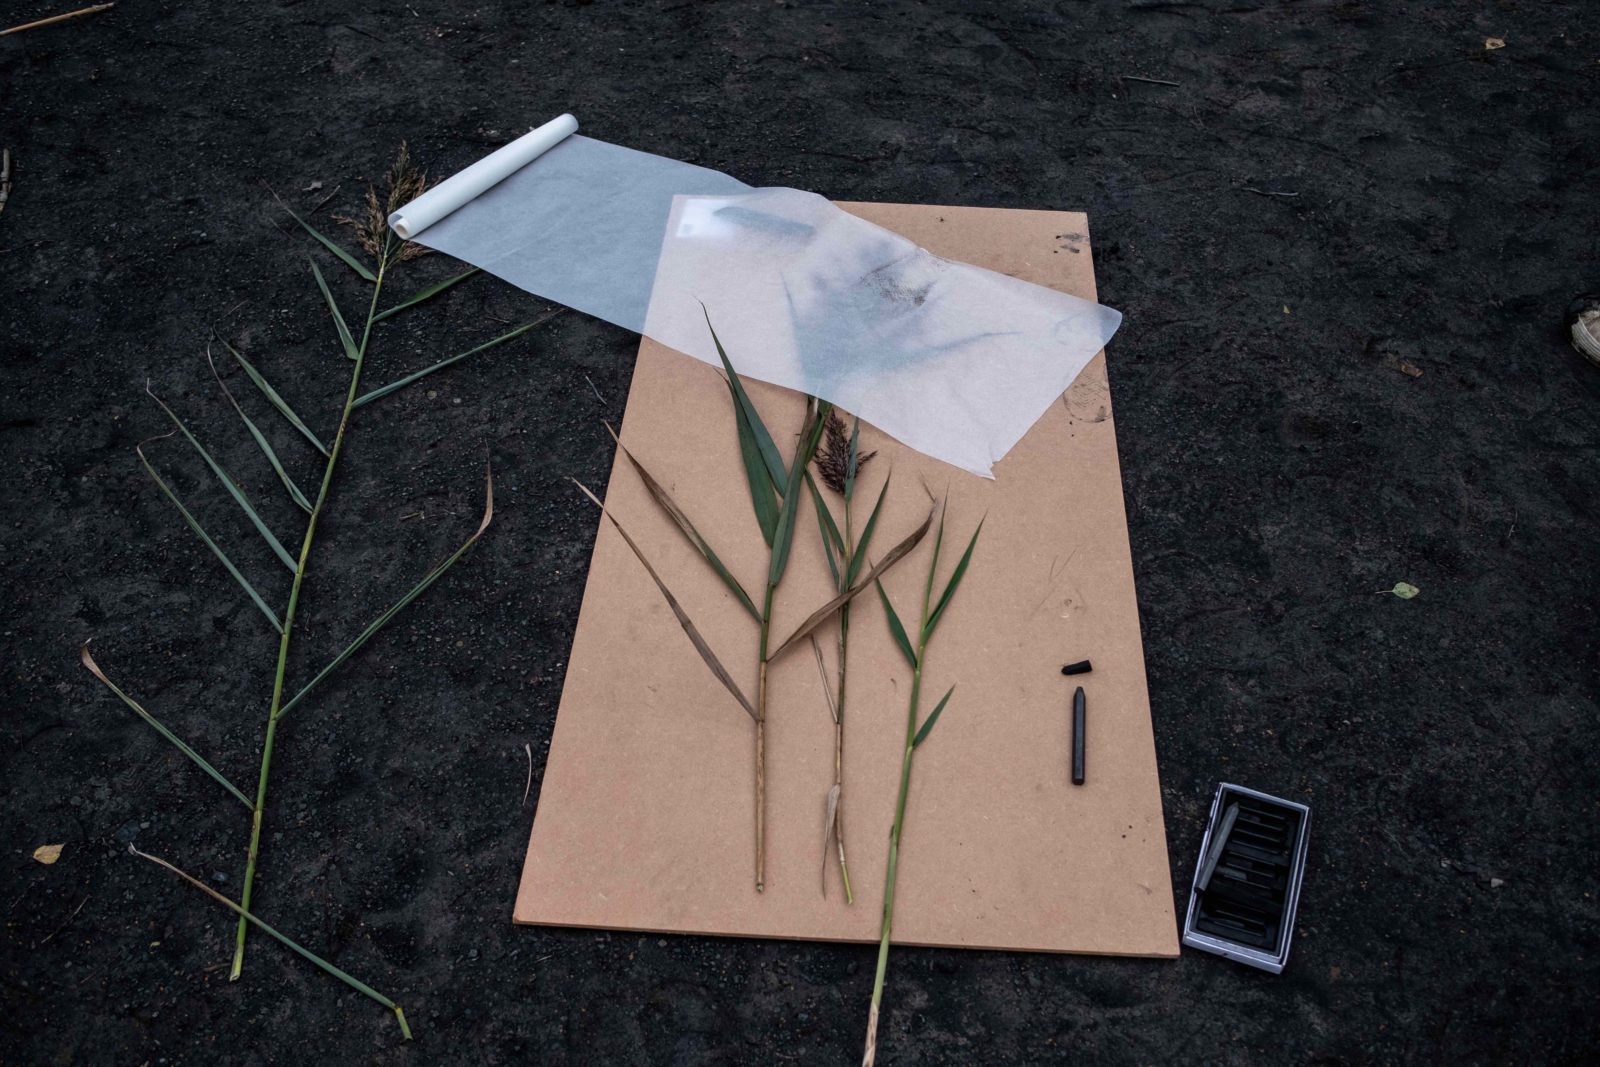 A board is laid on the ground with stalks laid on it and surrounding it and a roll of tracing paper laid out above it.